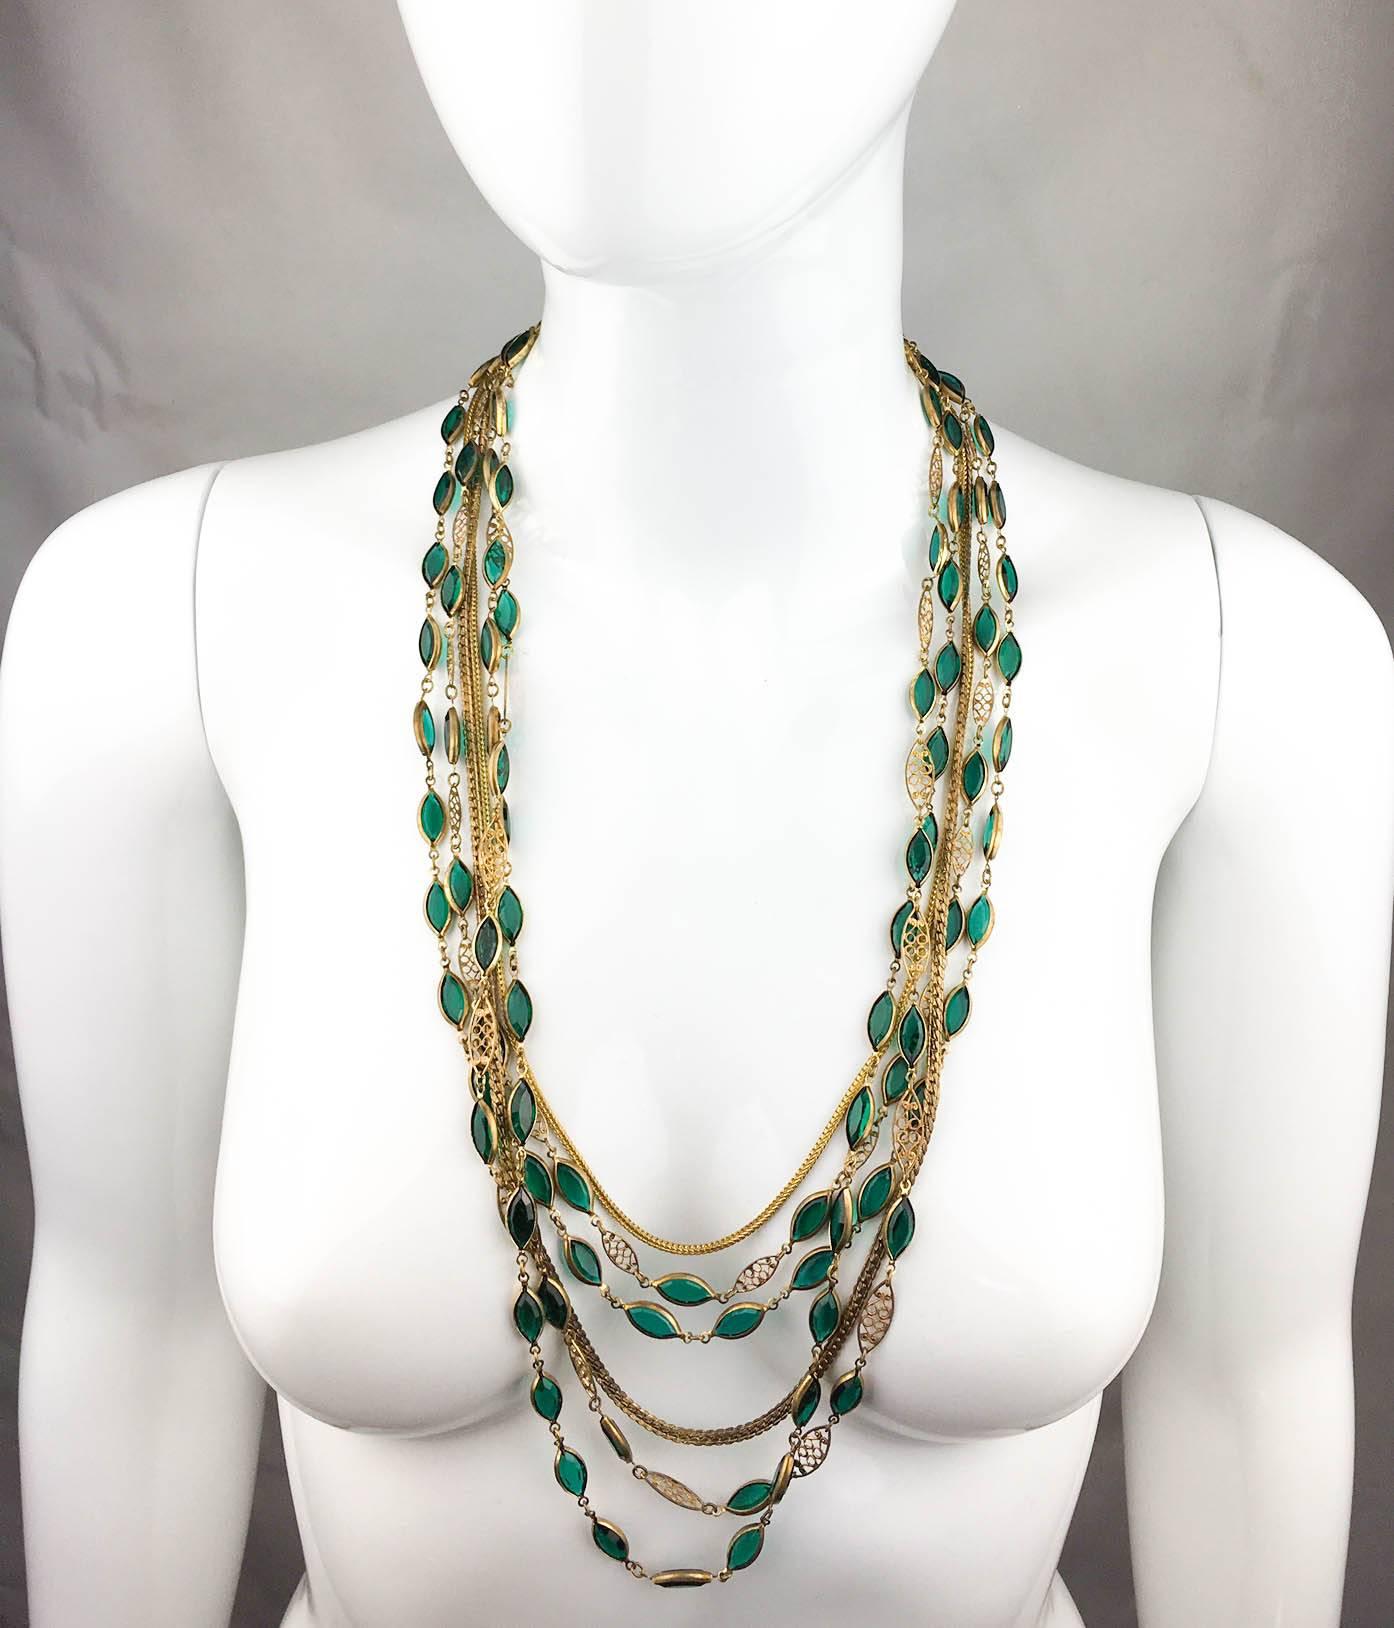 Multi-Strand Gold-Toned and Green Paste Necklace - 1940s/1950s In Good Condition For Sale In London, Chelsea